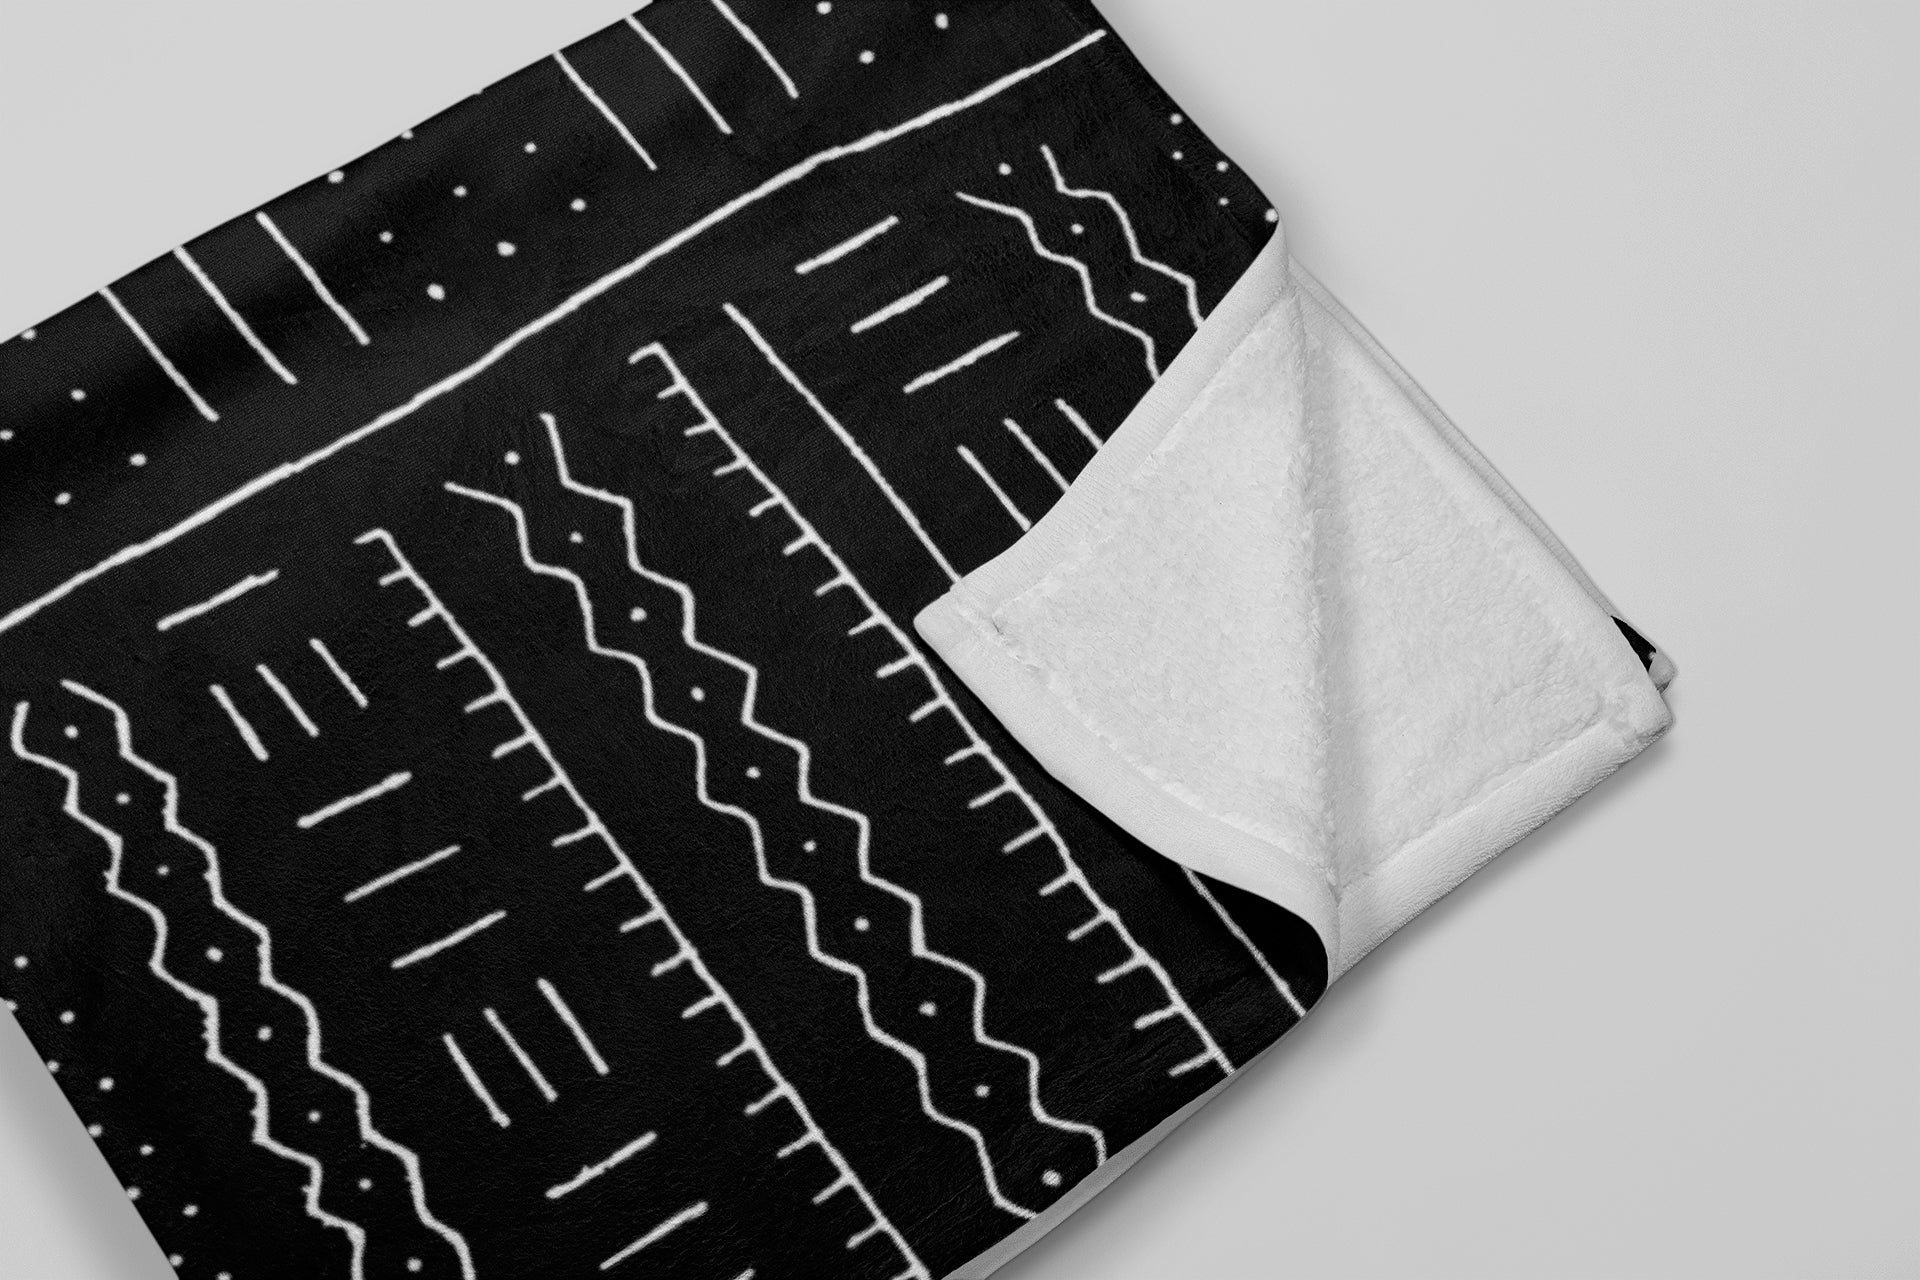 Afrocentric Black and White Throw Blanket Fleece Ethnic